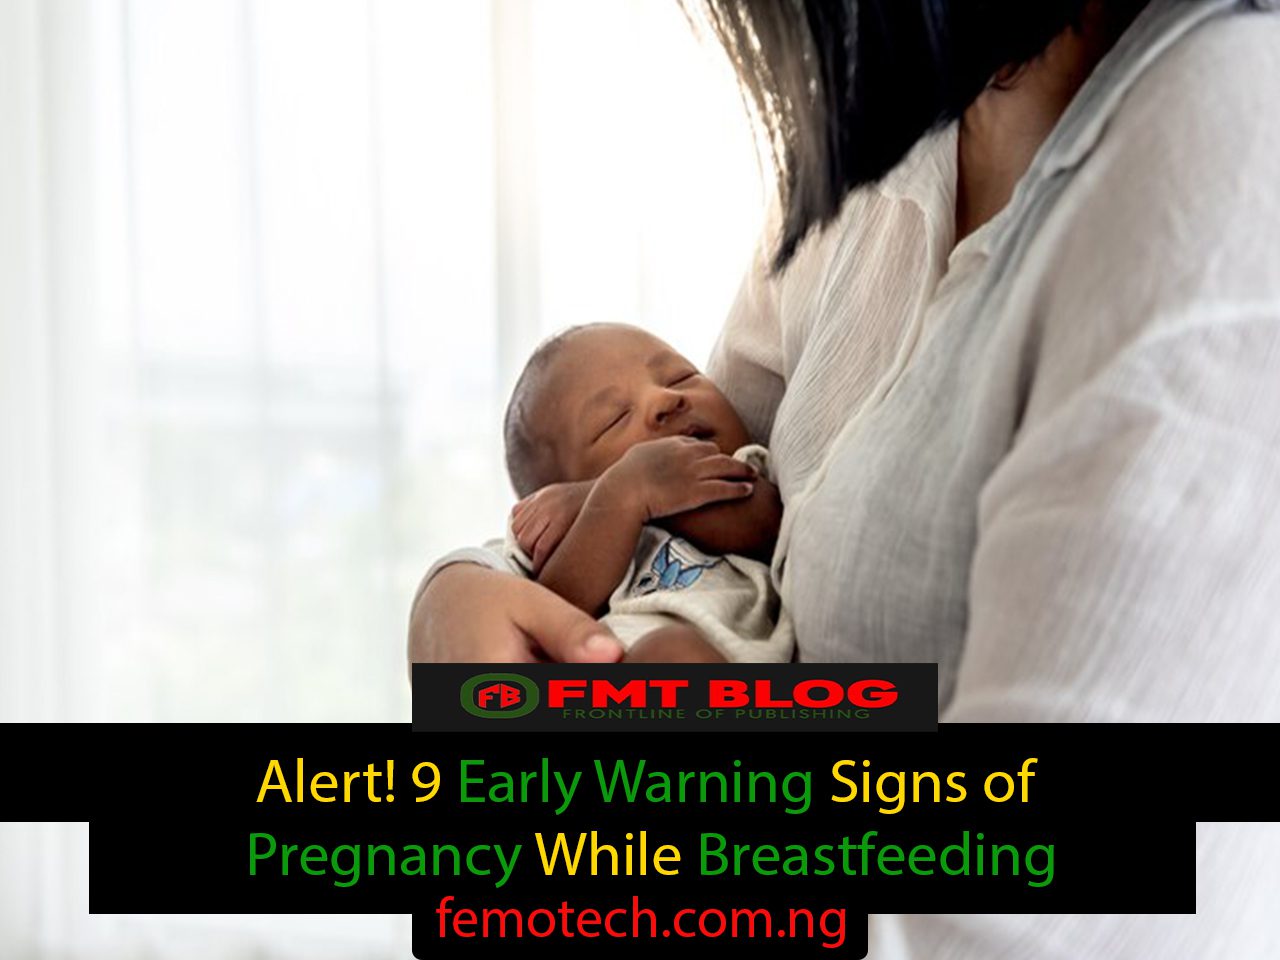 Alert! 9 Early Warning Signs of Pregnancy While Breastfeeding